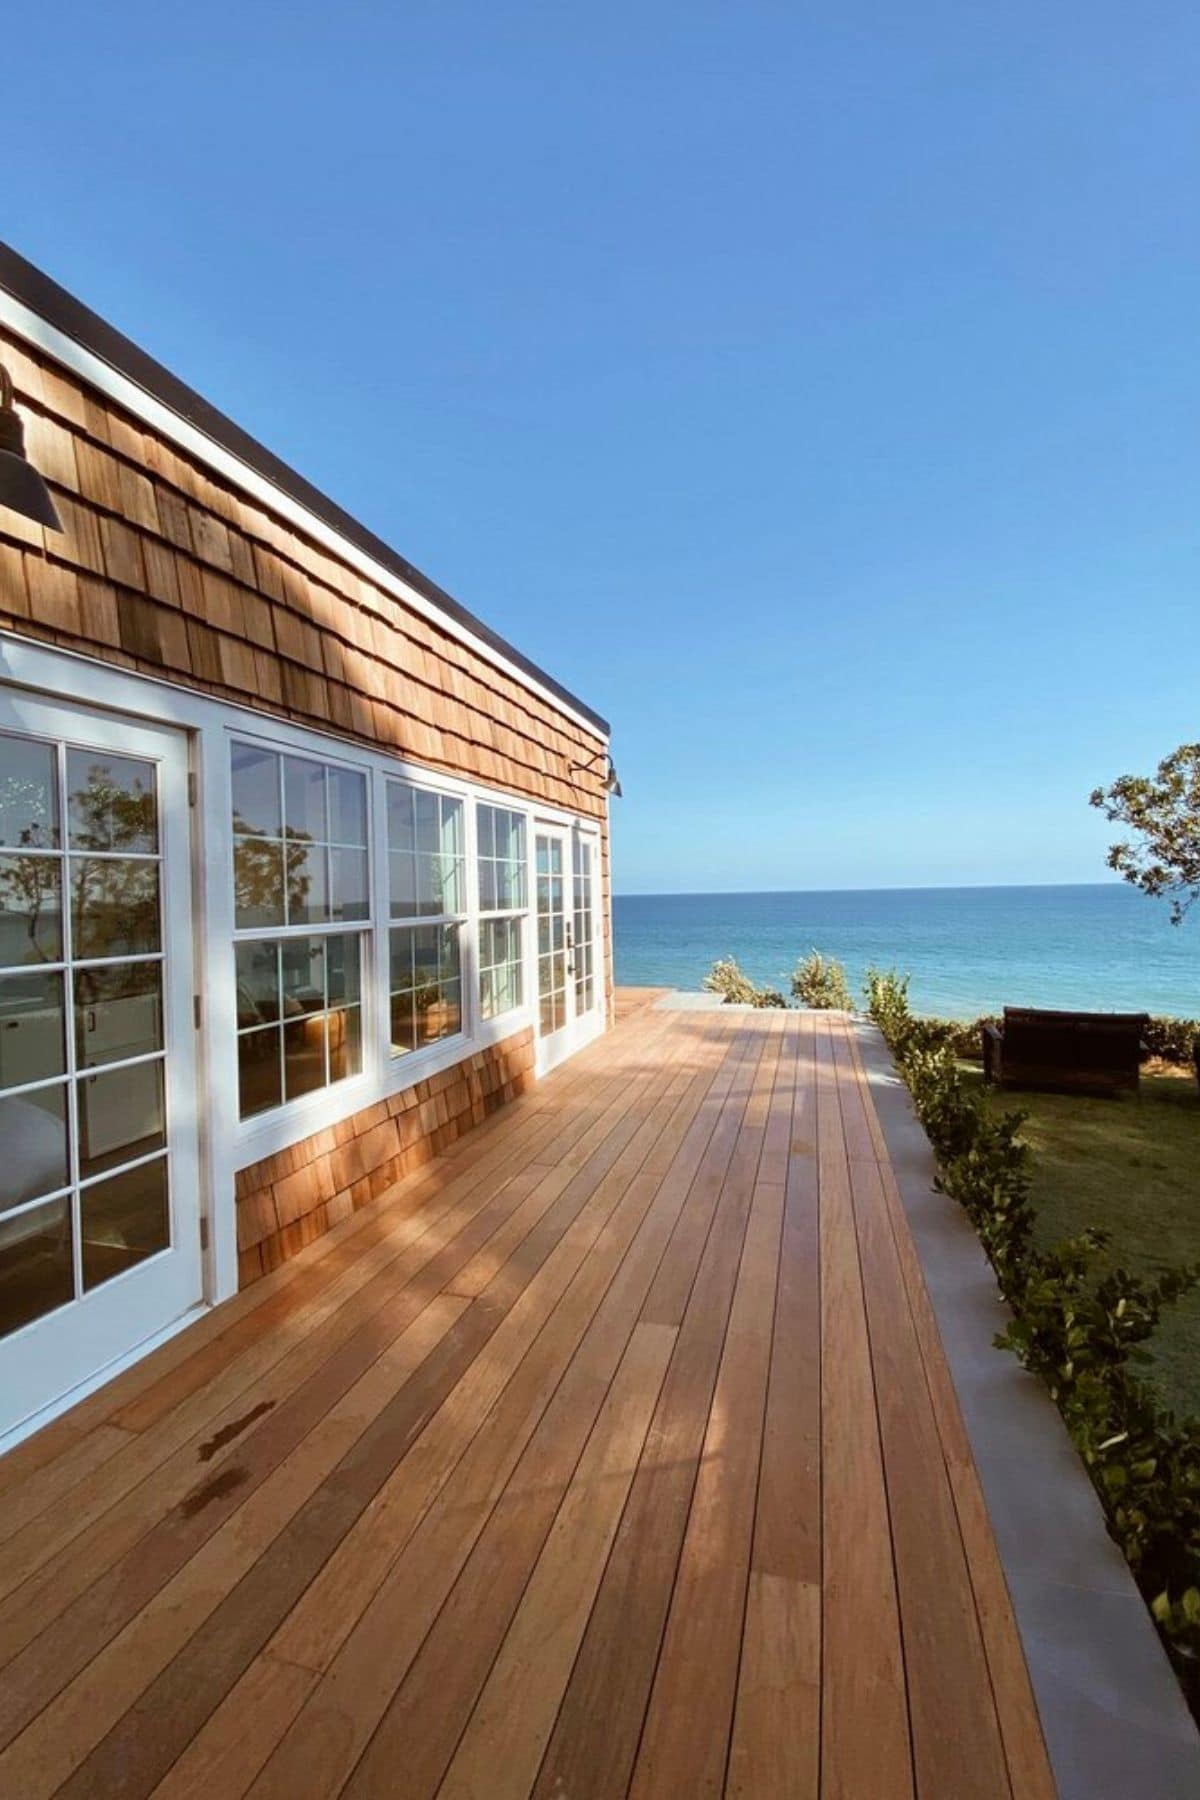 Wood porch length of tiny home with view of ocean in background